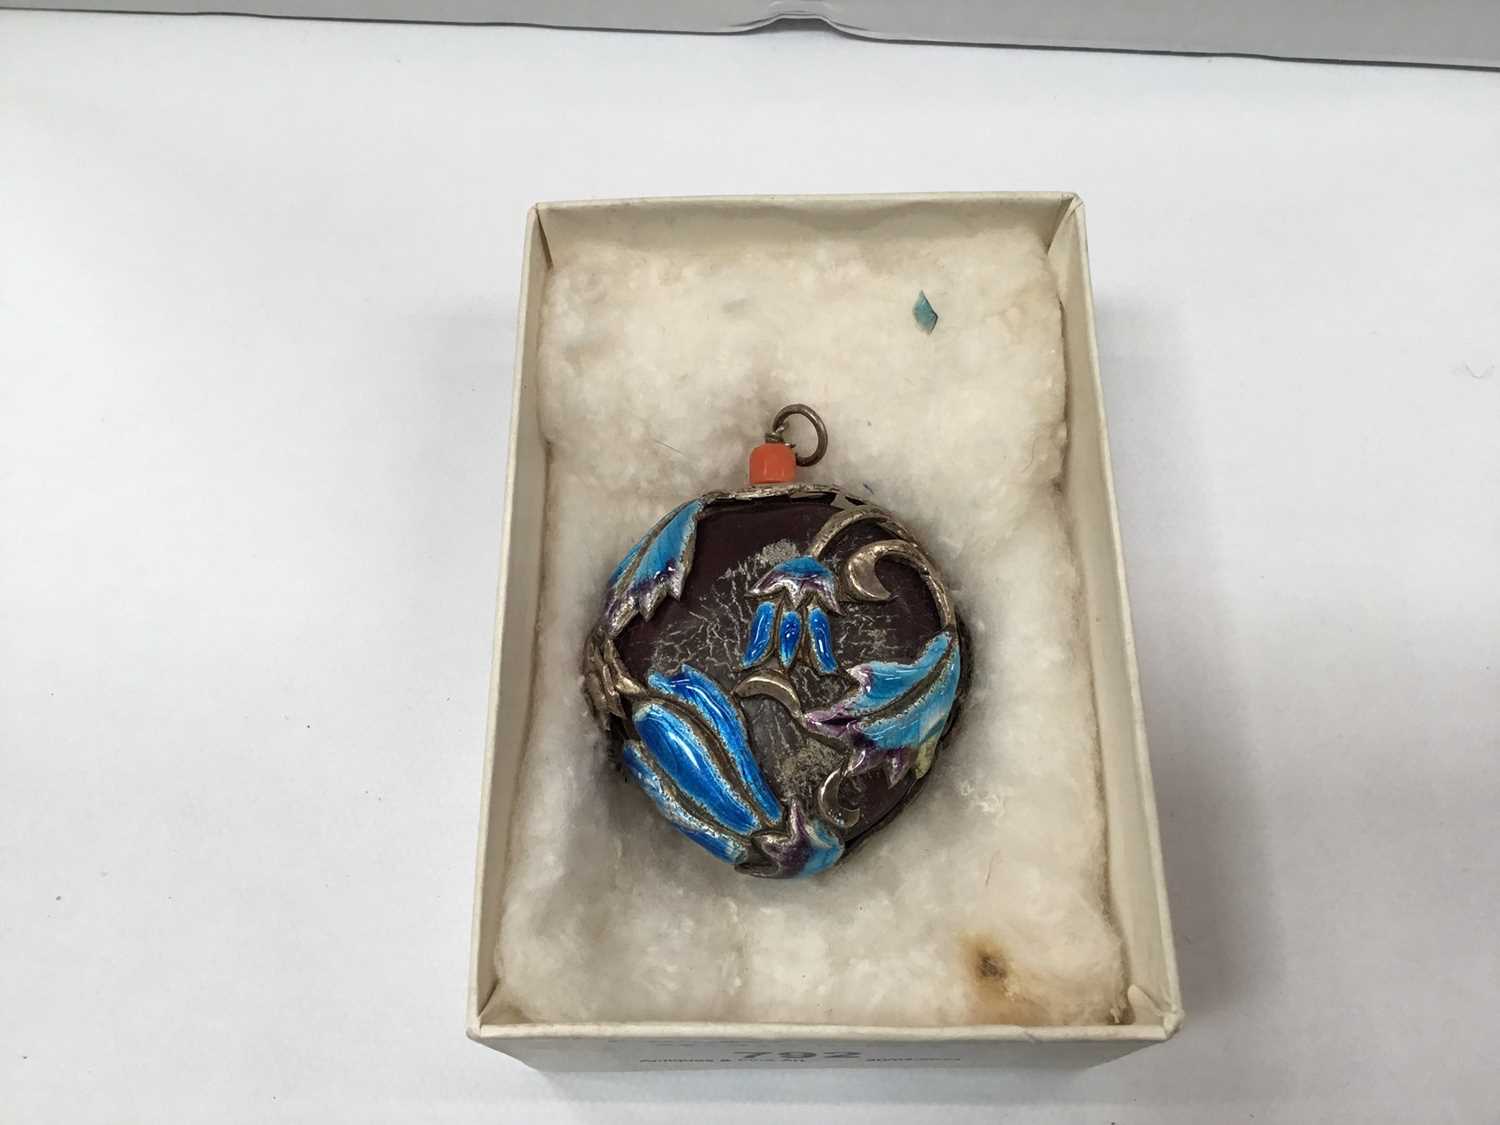 Chinese snuff with enamelled silver overlay on nut - Image 2 of 5